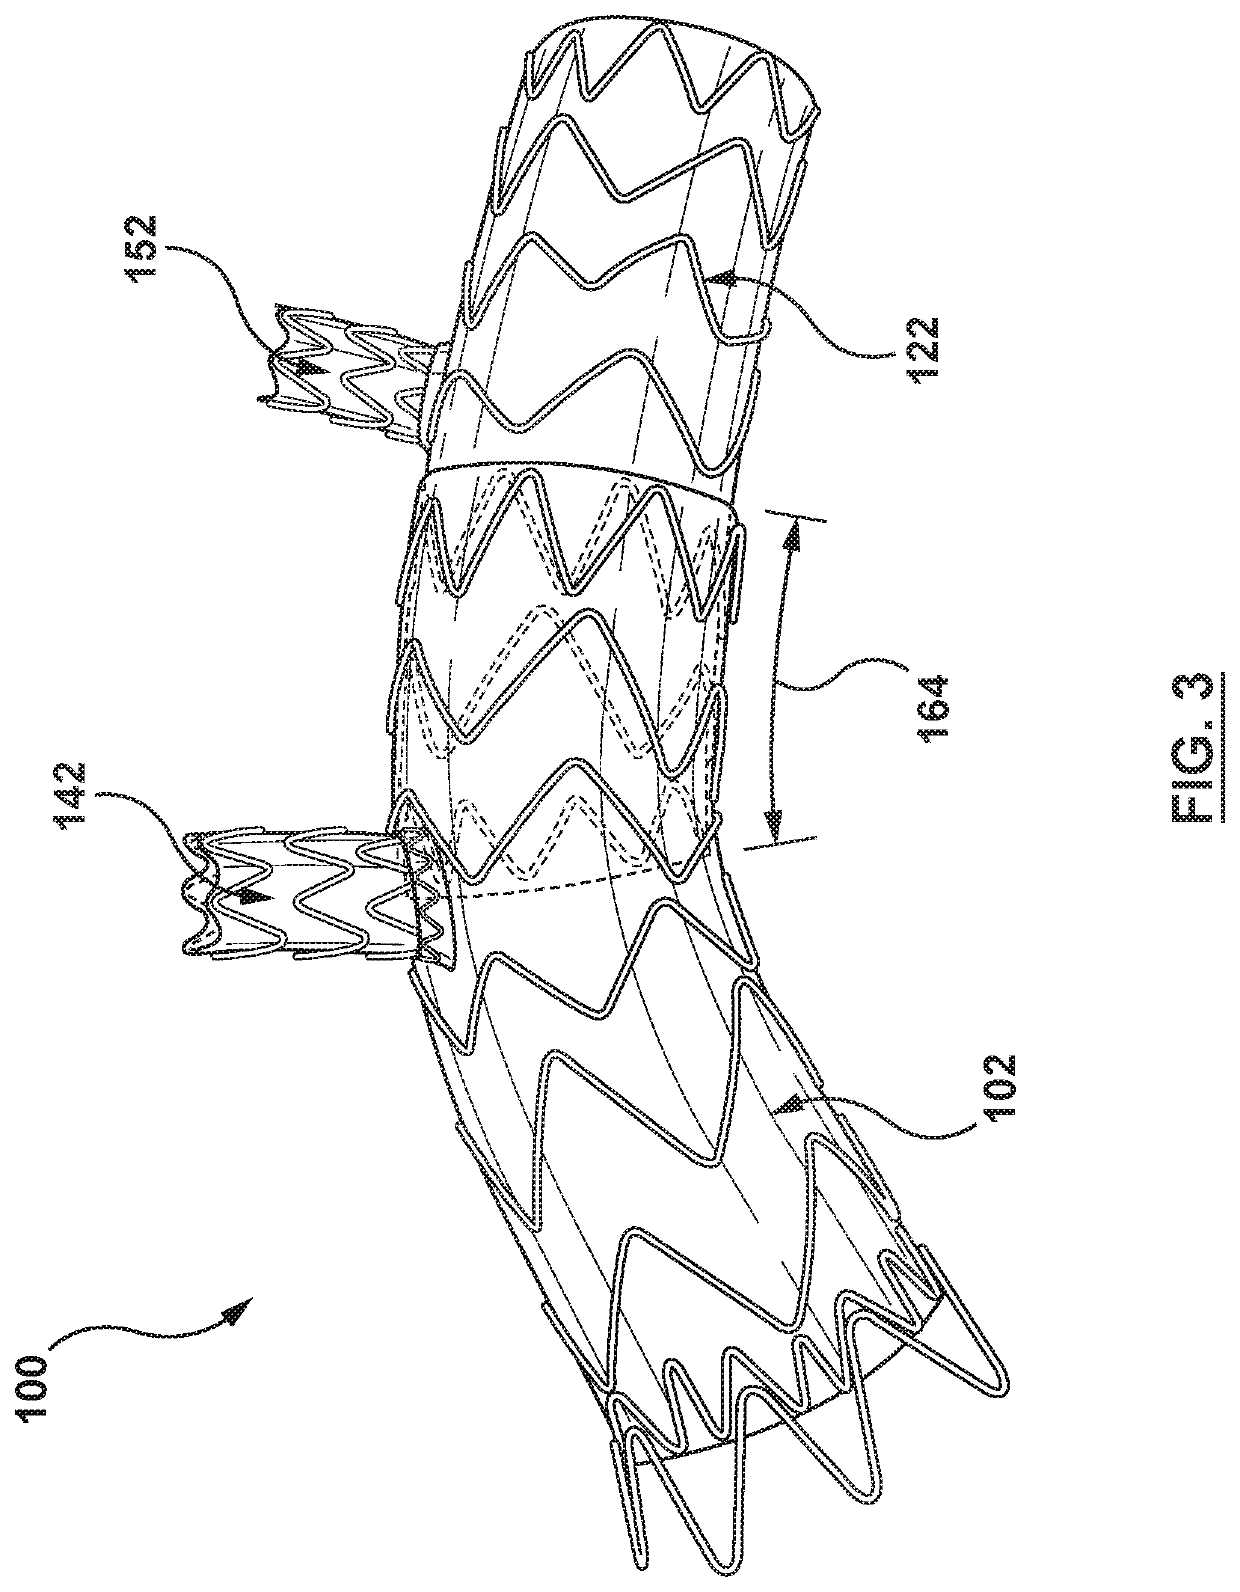 Modular aortic arch prosthetic assembly and method of use thereof